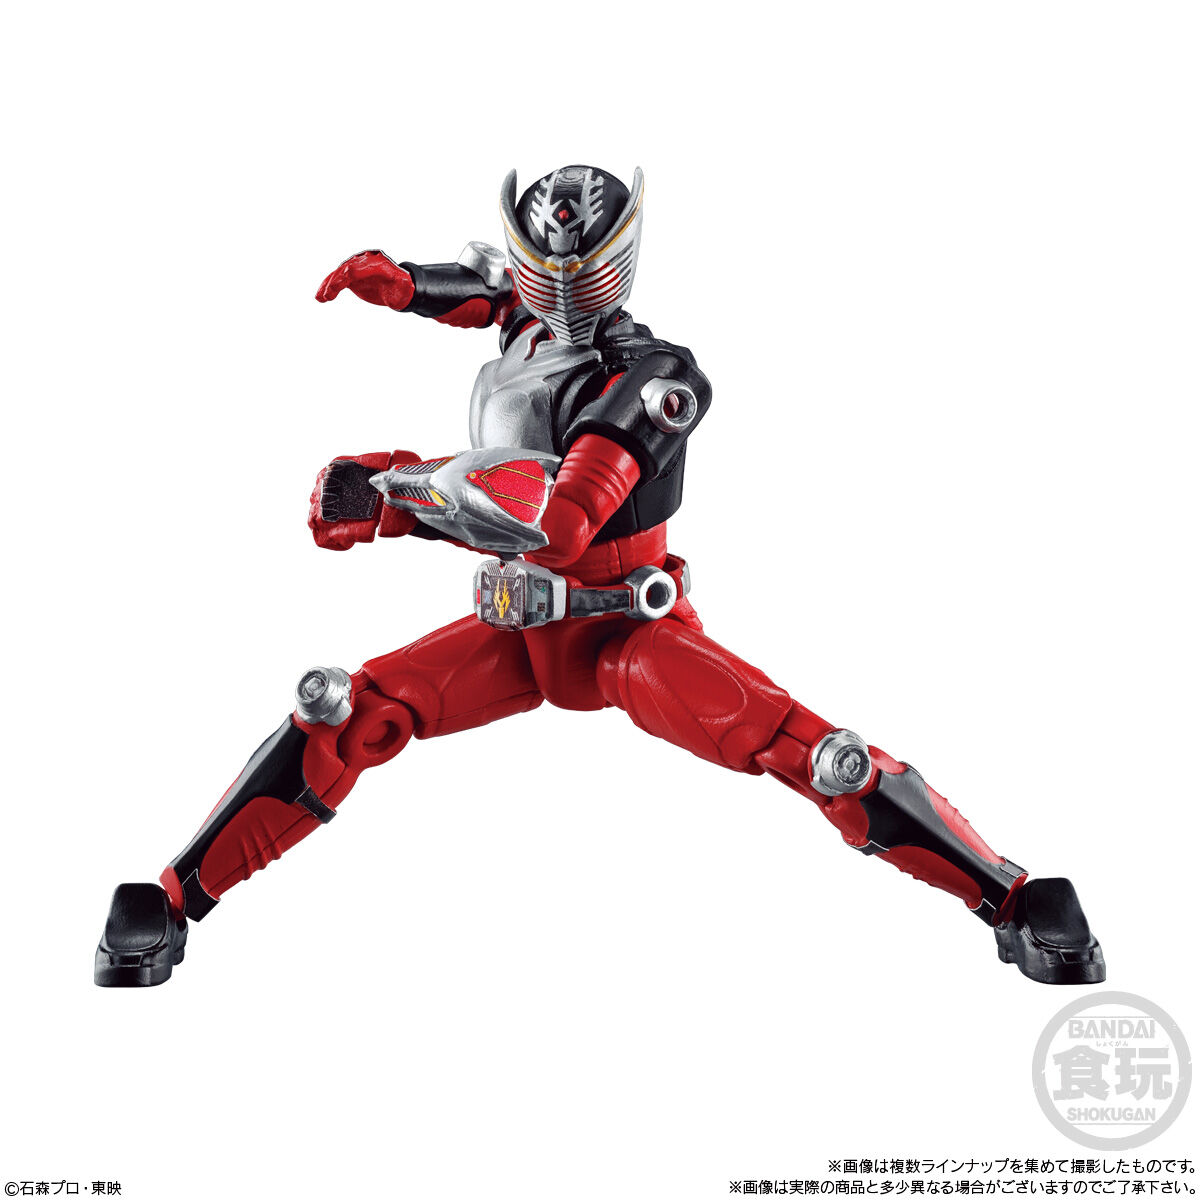 SO-DO CHRONICLE 仮面ライダー龍騎 ボルキャンサー&マグナギガセット 